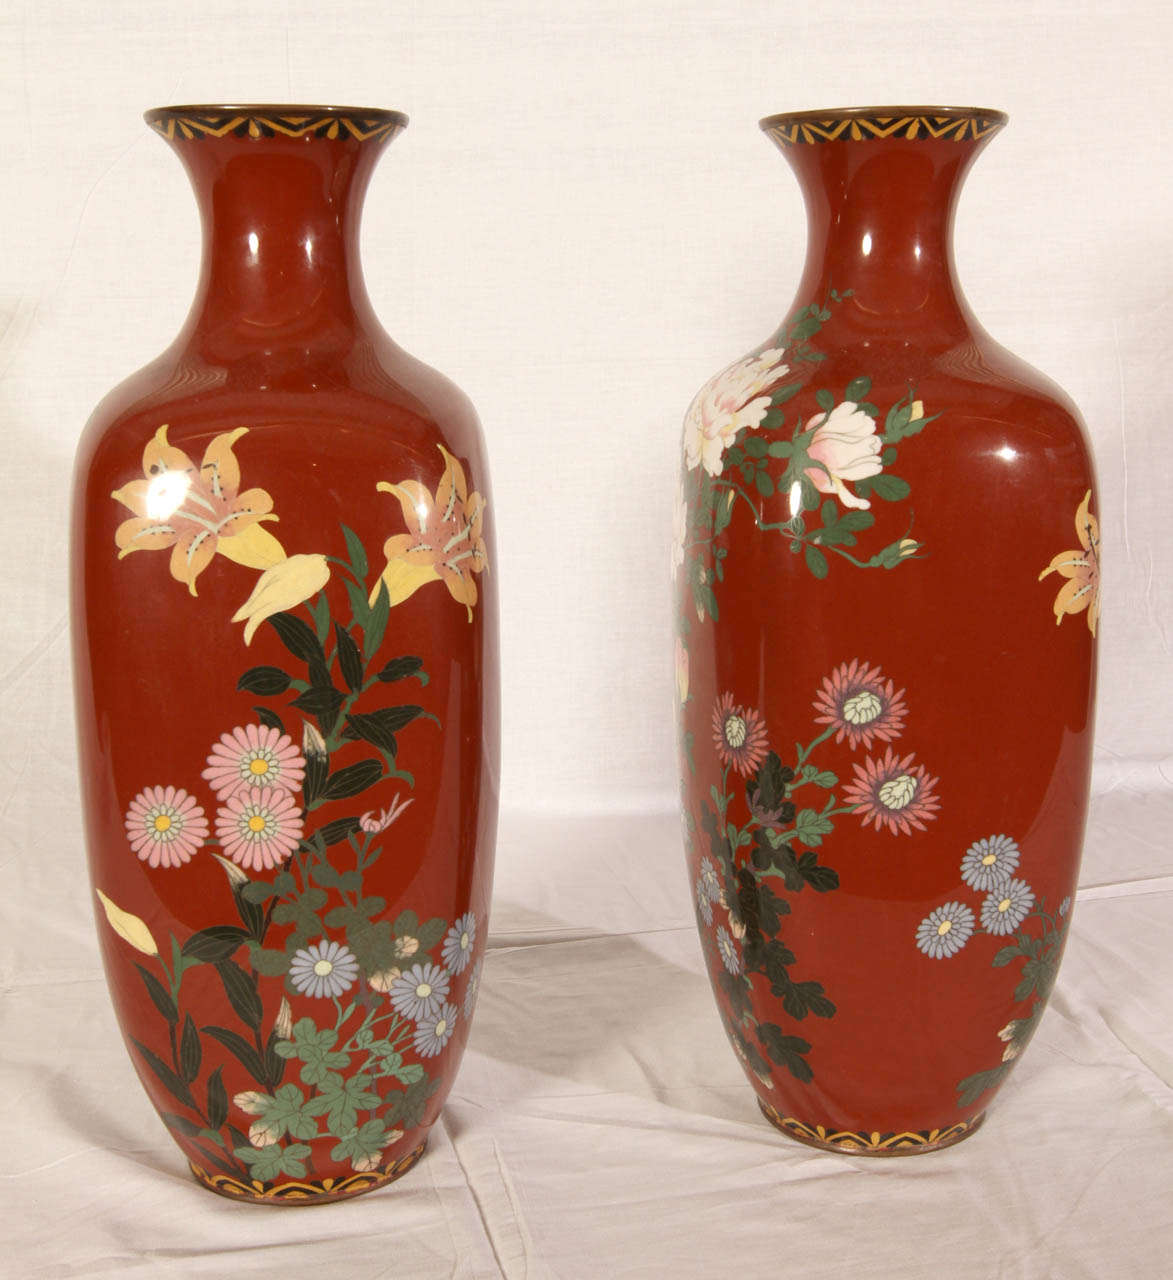 Cloissoné Pair of Early 20th Century Japanese Vases For Sale